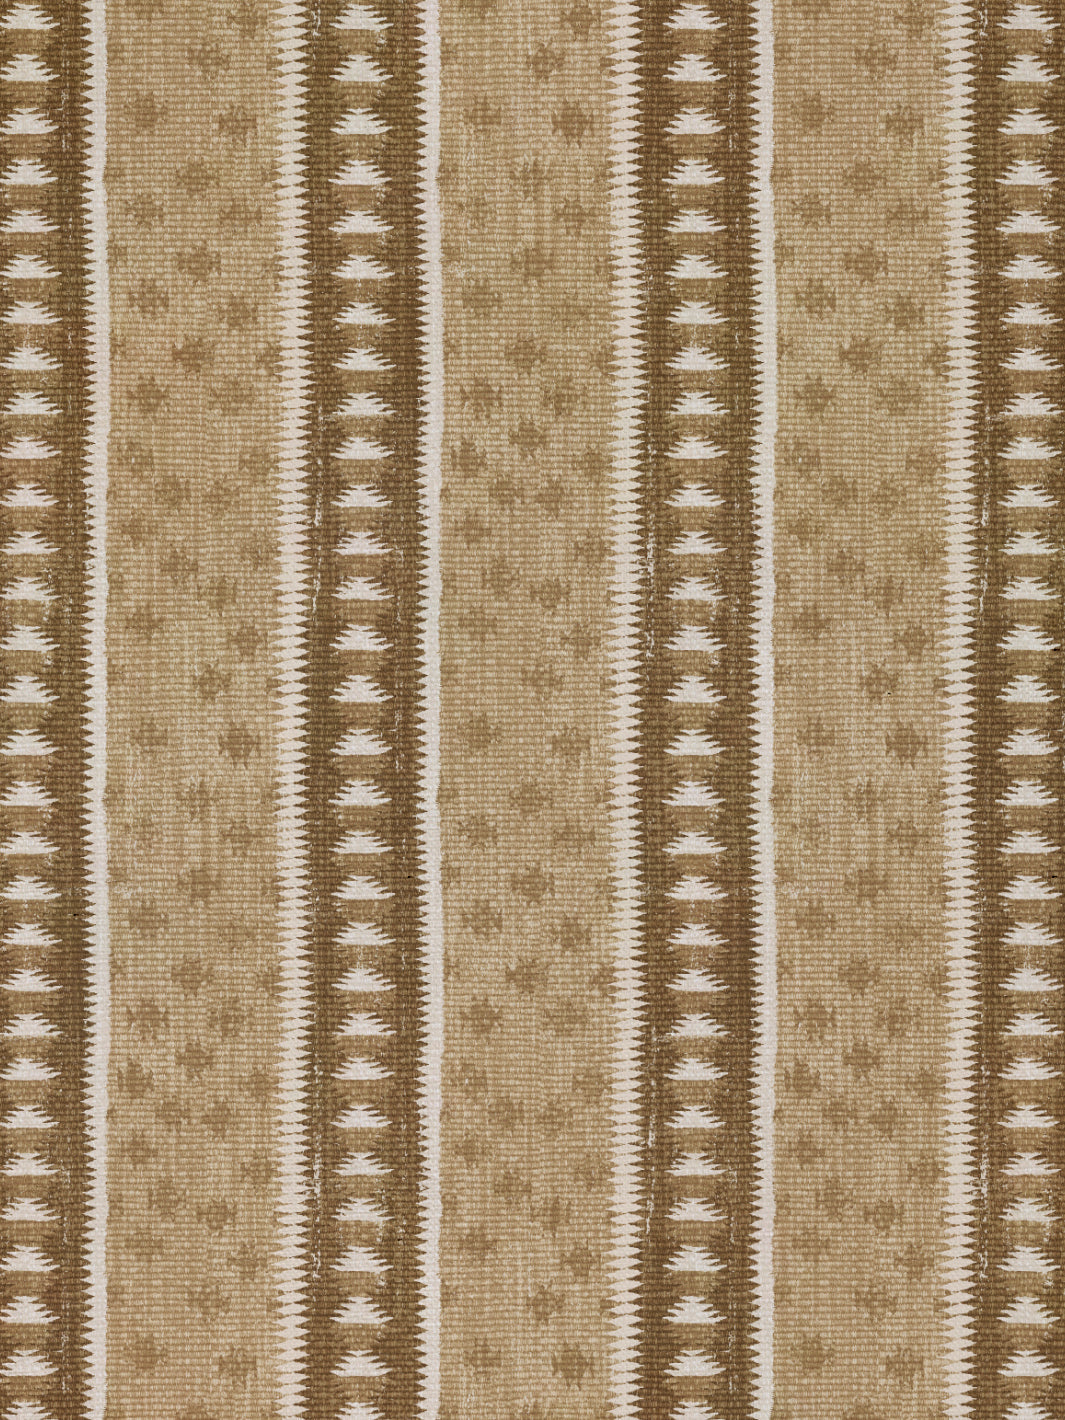 'Northstar Stripe' Linen Fabric by Nathan Turner - Gold